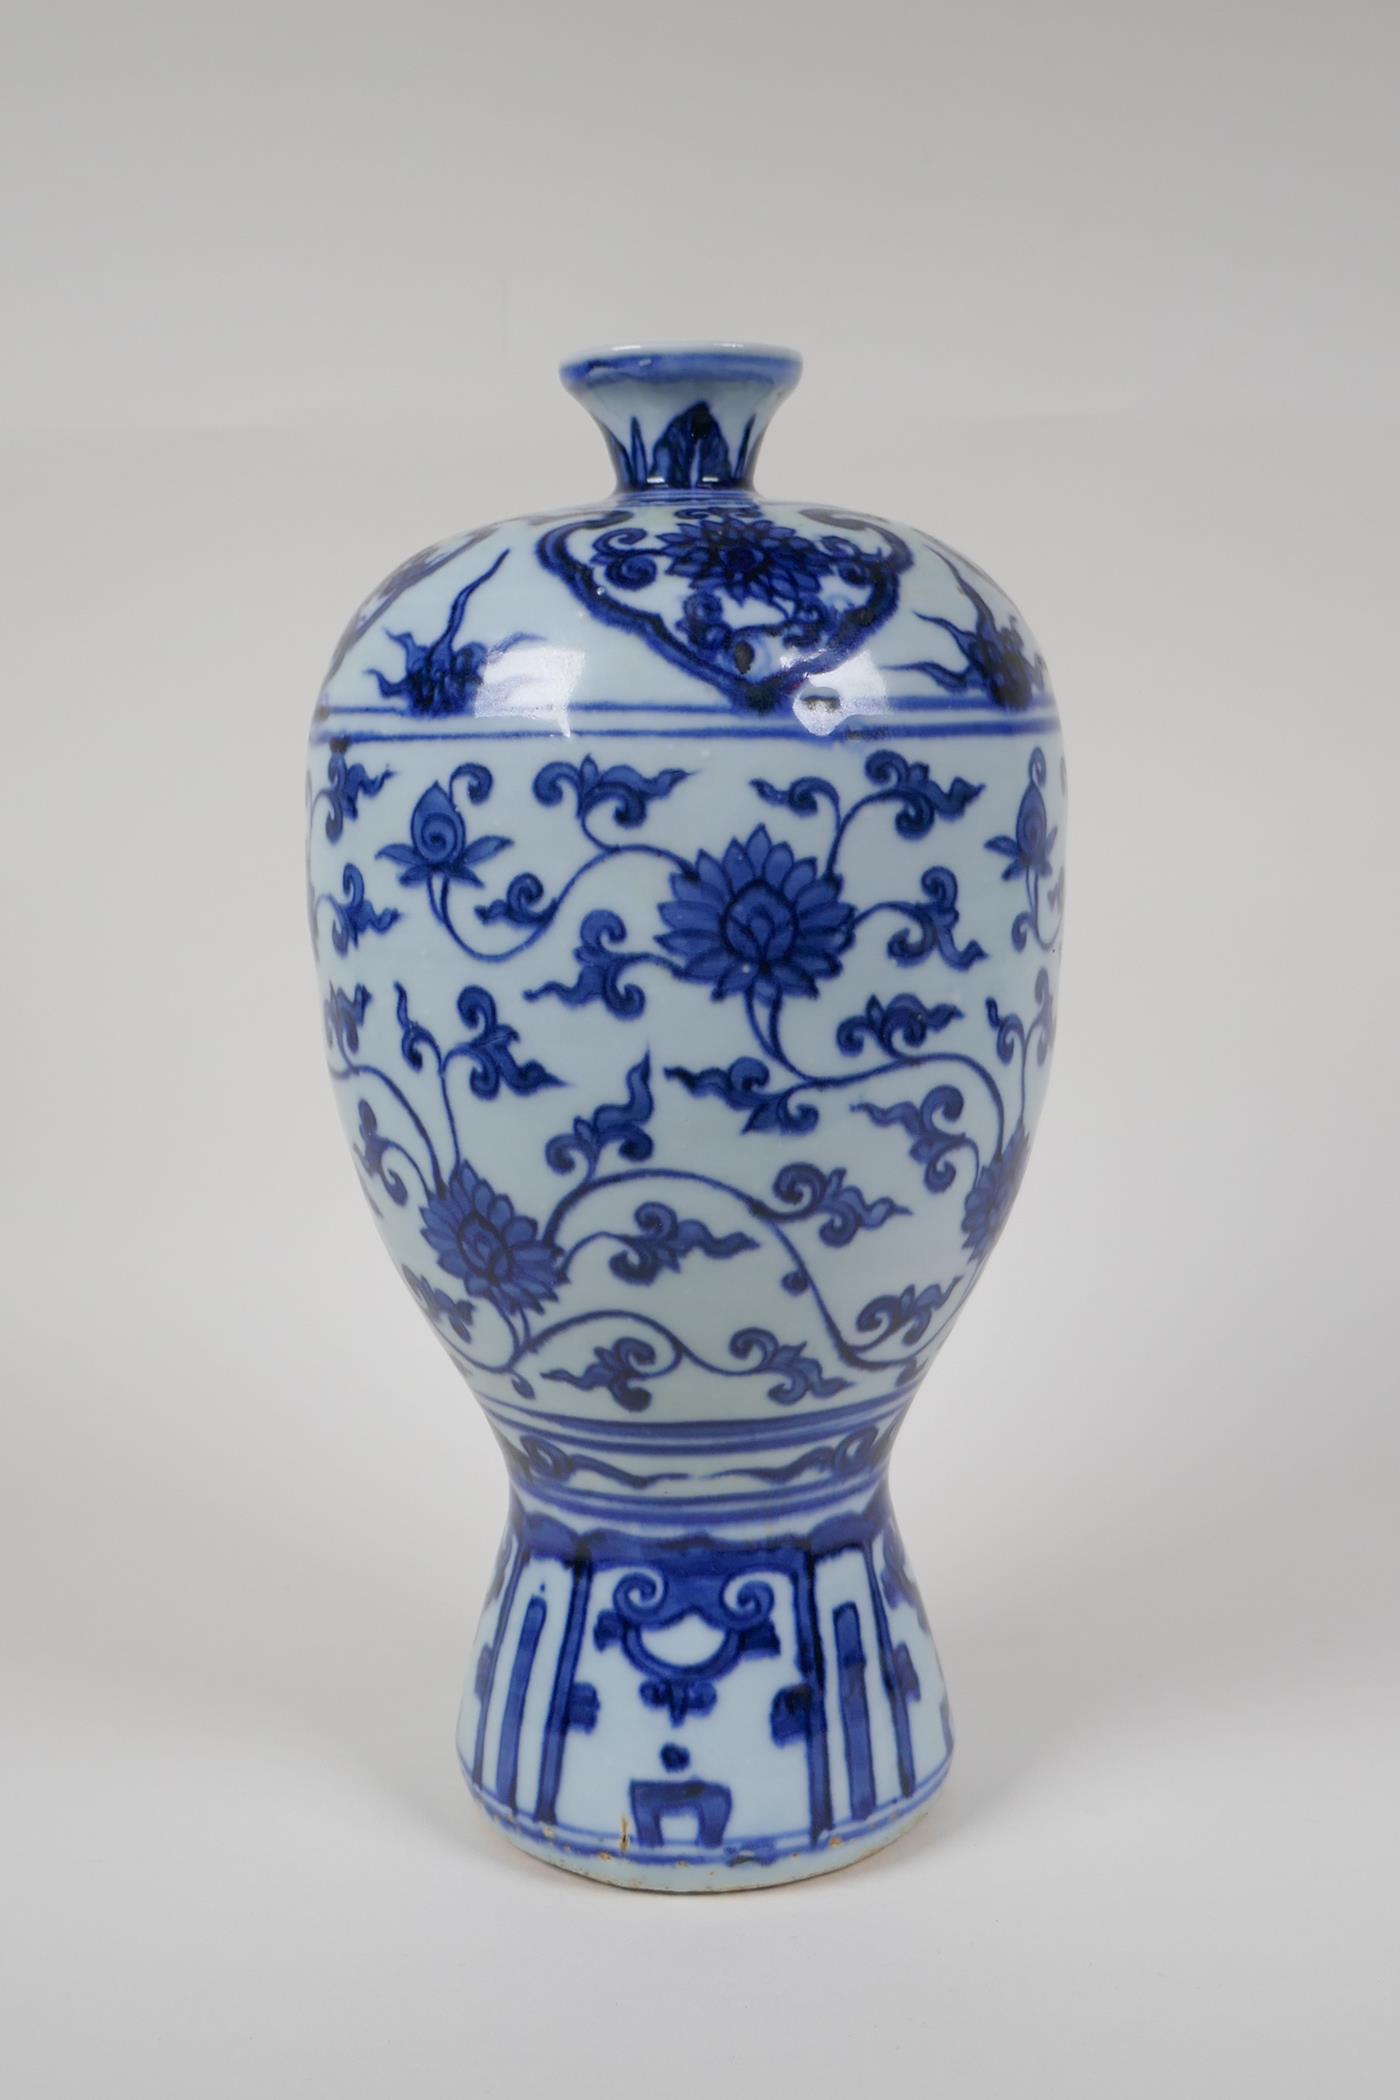 A Chinese ming style blue and white porcelain vase with scrolling lotus flower pattern, 11½" high